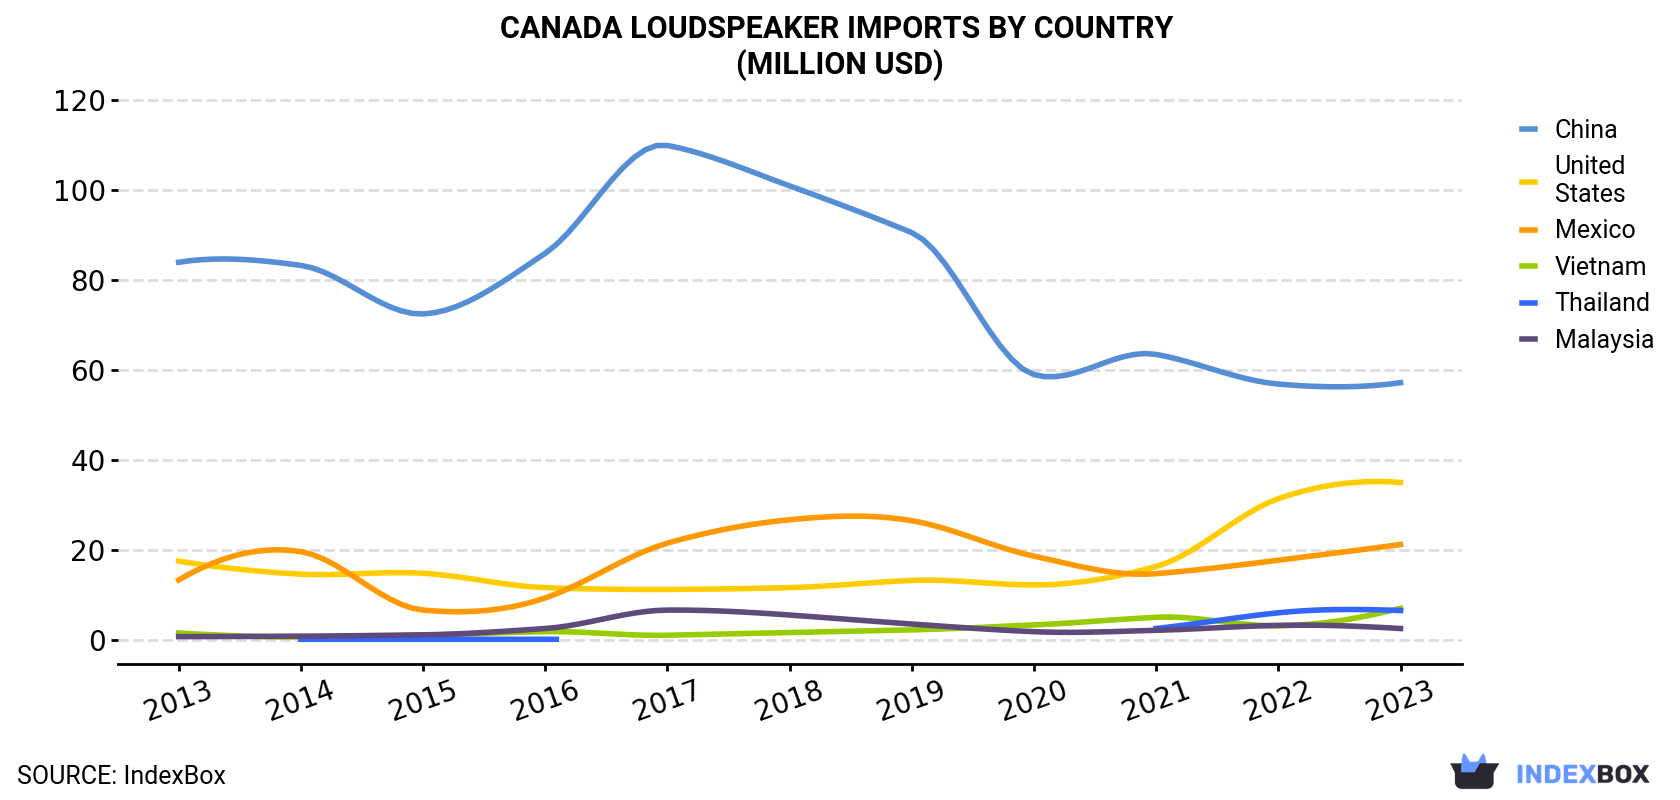 Canada Loudspeaker Imports By Country (Million USD)